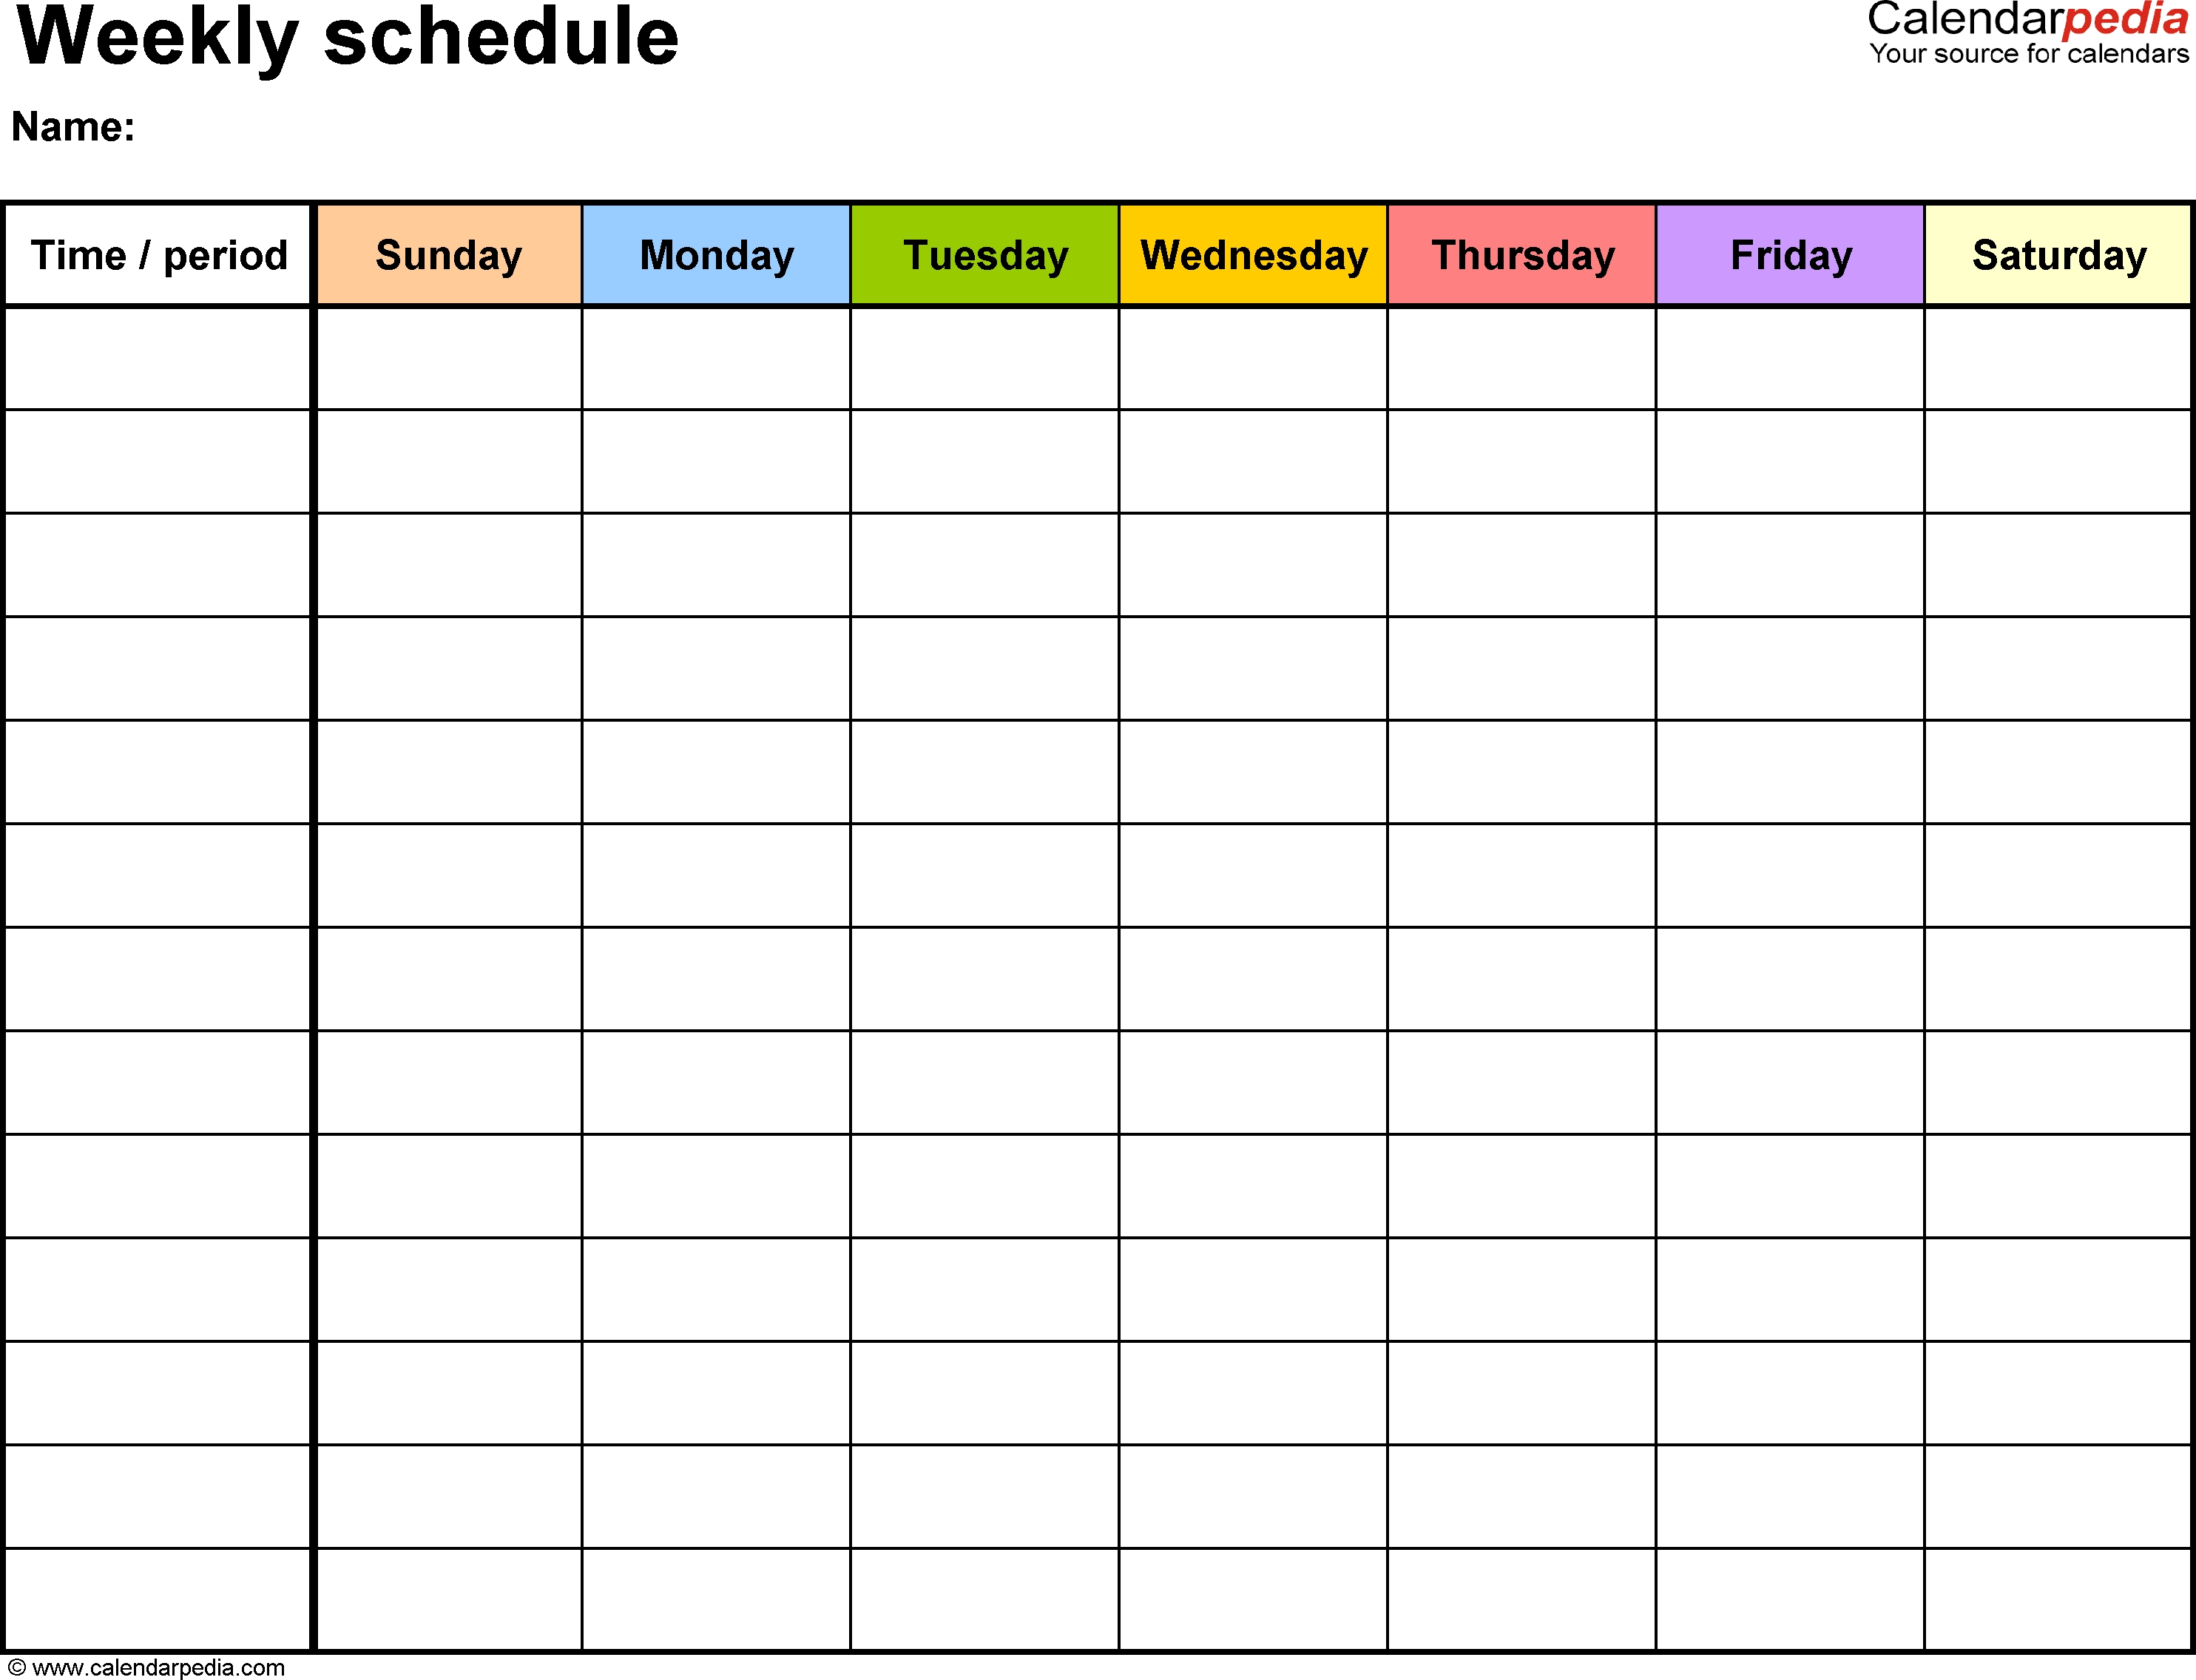 Free Weekly Schedule Templates For Pdf - 18 Templates  7 Day Weekly Planner Pdf